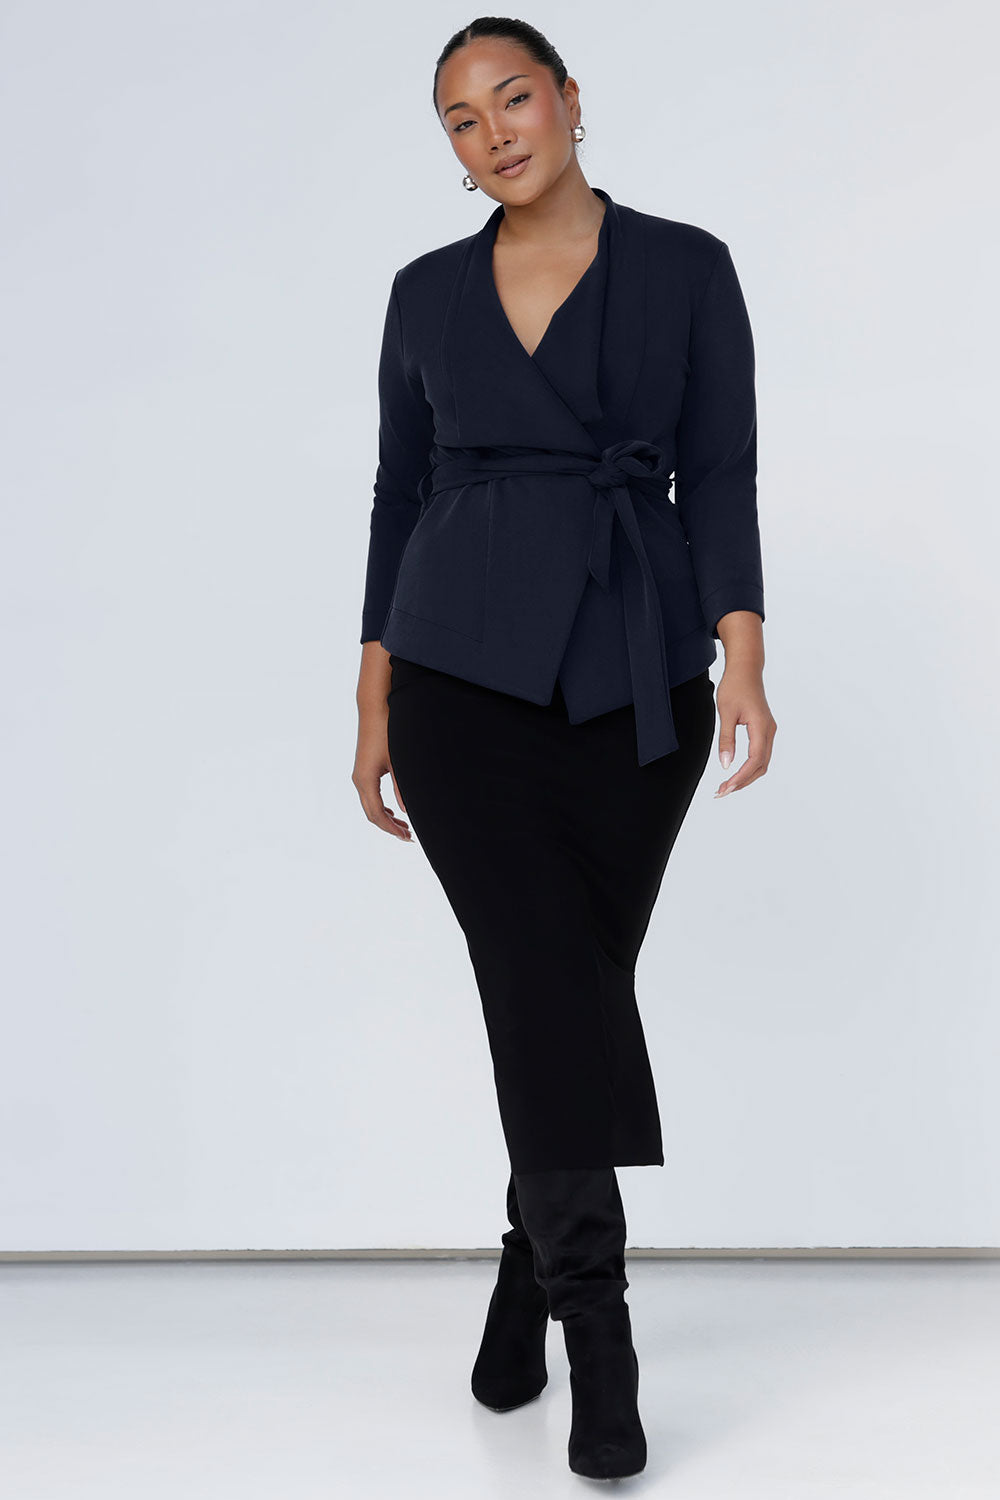 A size 10 woman wears the Lyndon Jacket in Bluestone. A wrap style jacket with waist belt and collared neckline. Made in soft luxurios modal. Rug up on the way to the office or weekend winter get away. Made in Australia for women size 8 -24. Styled back with an Andi skirt in black. 